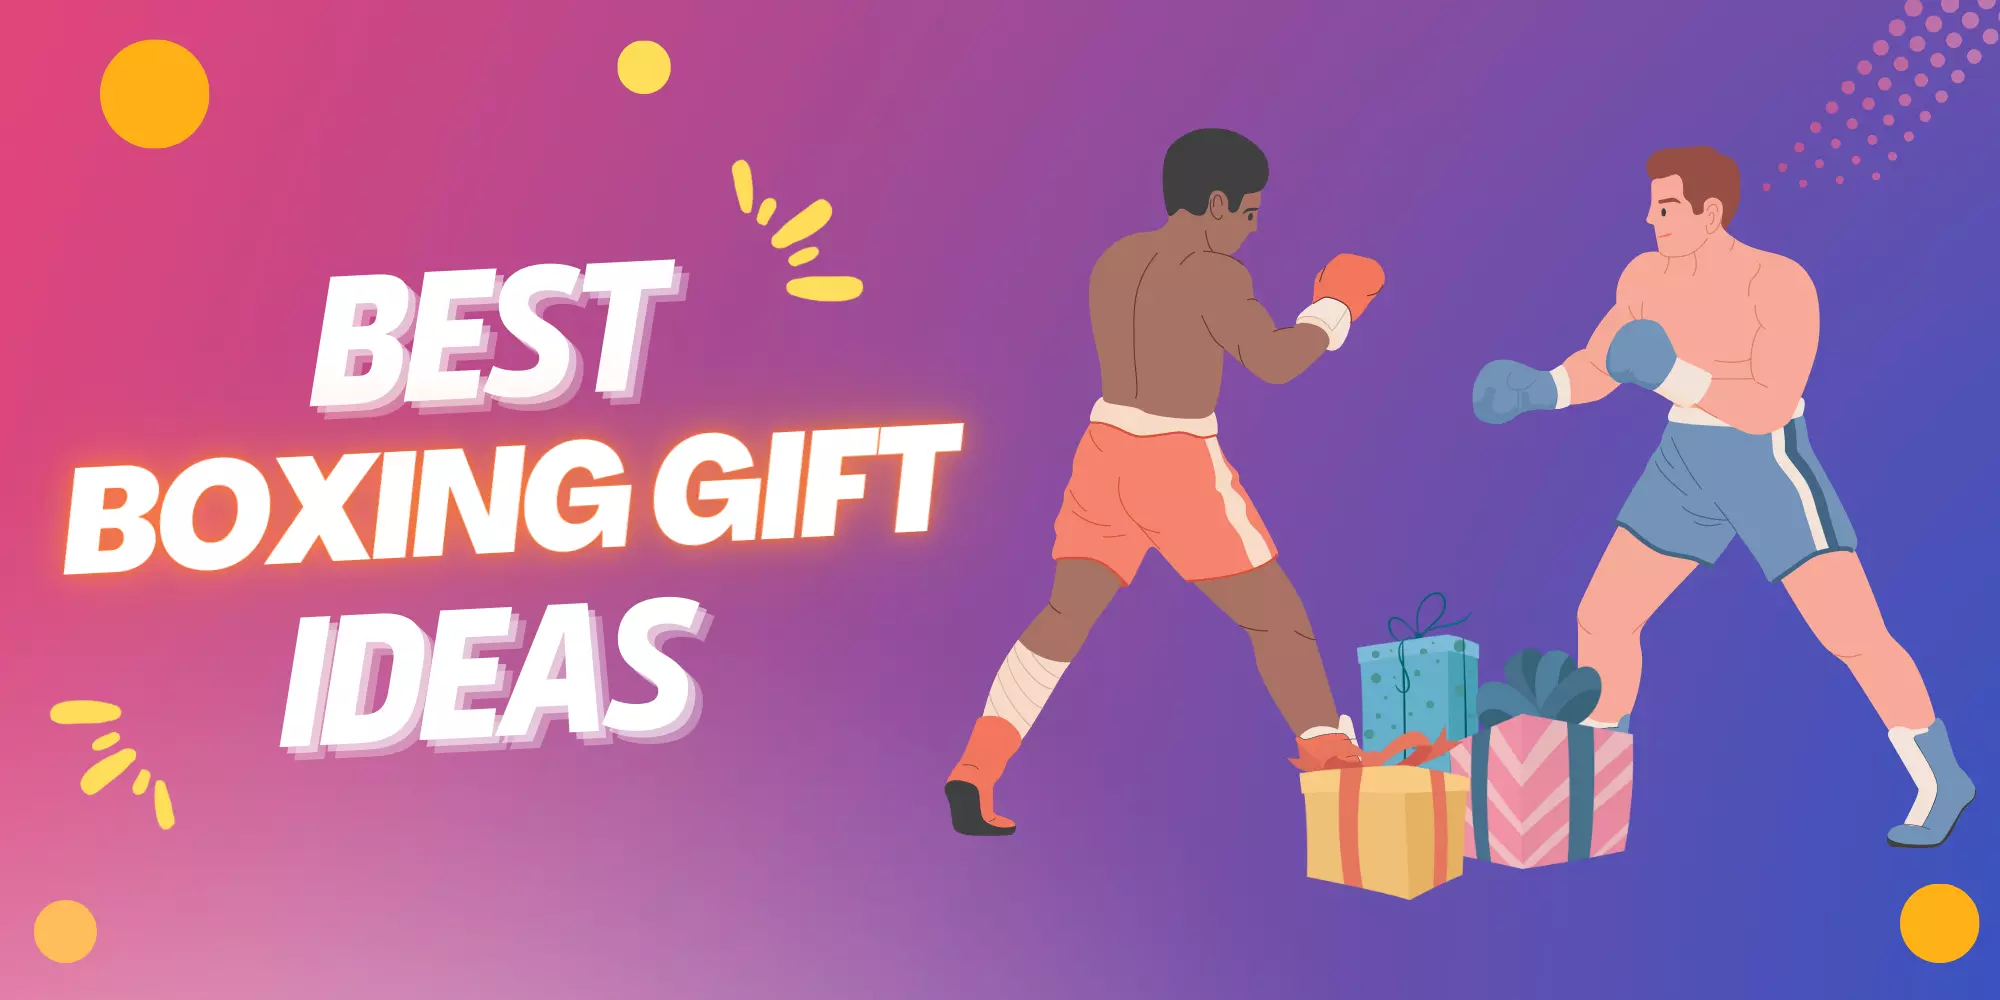 Boxing Gift Ideas